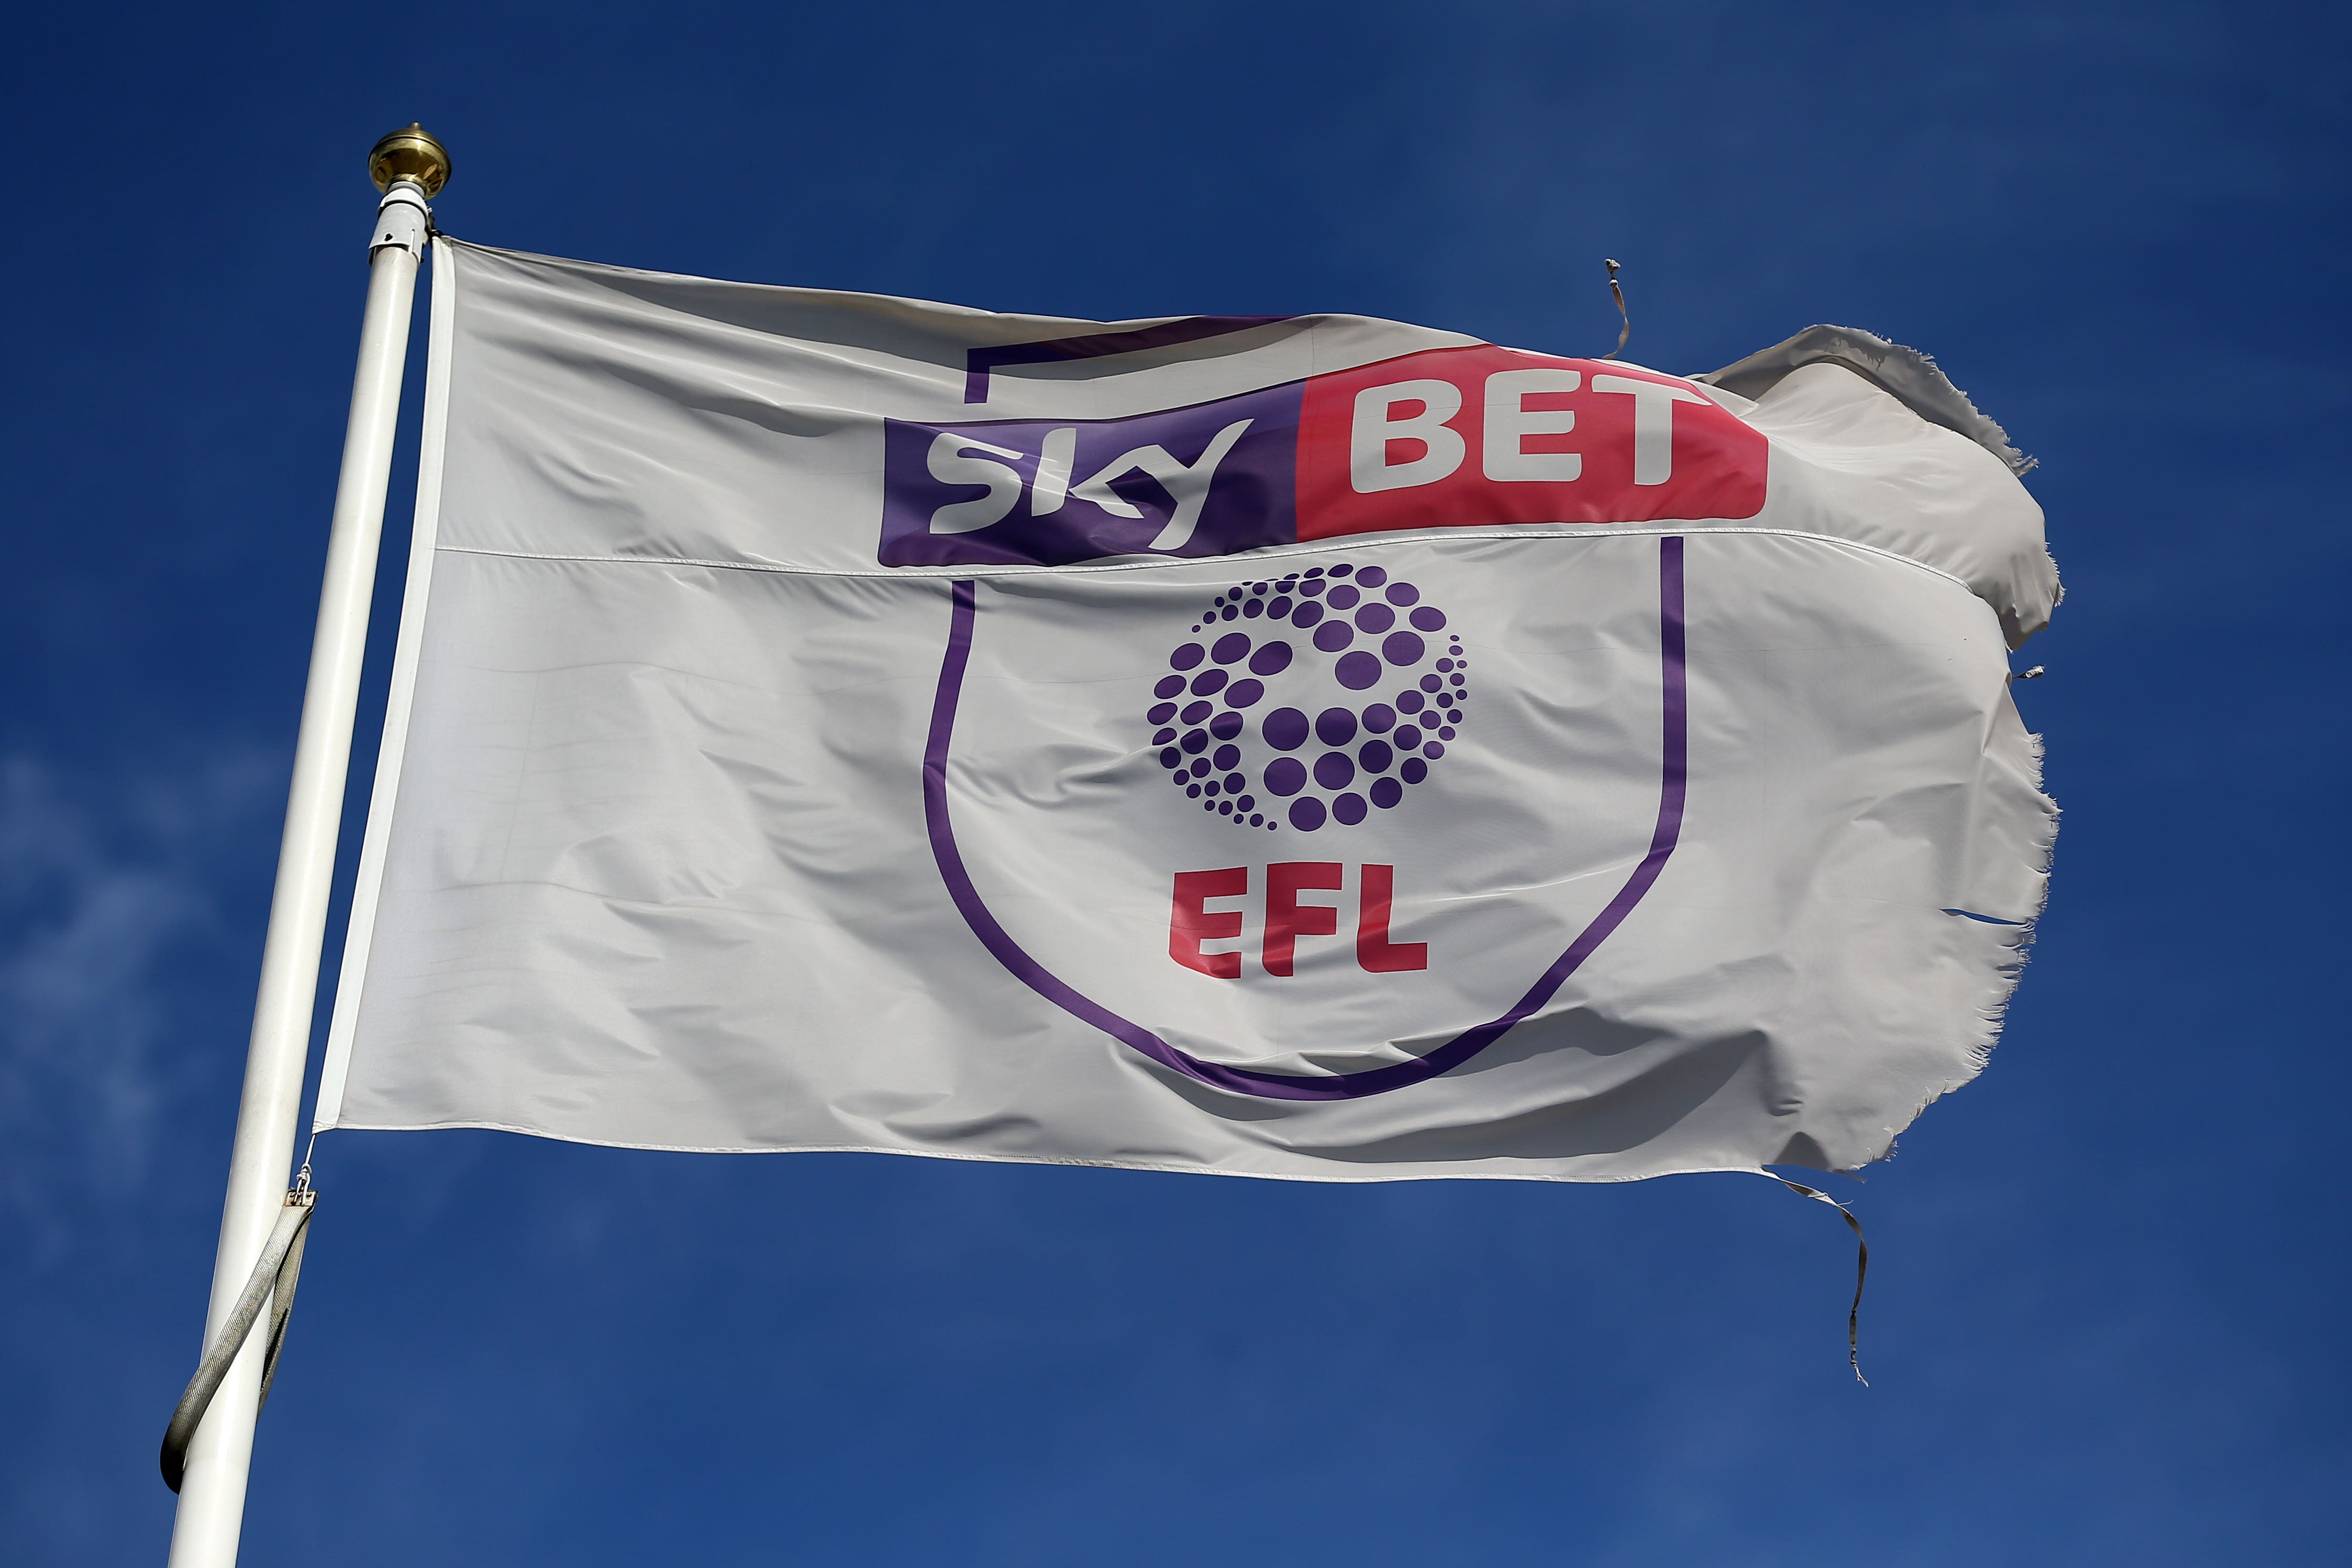 EFL - TABLE: A look at the Sky Bet Championship standings. Will